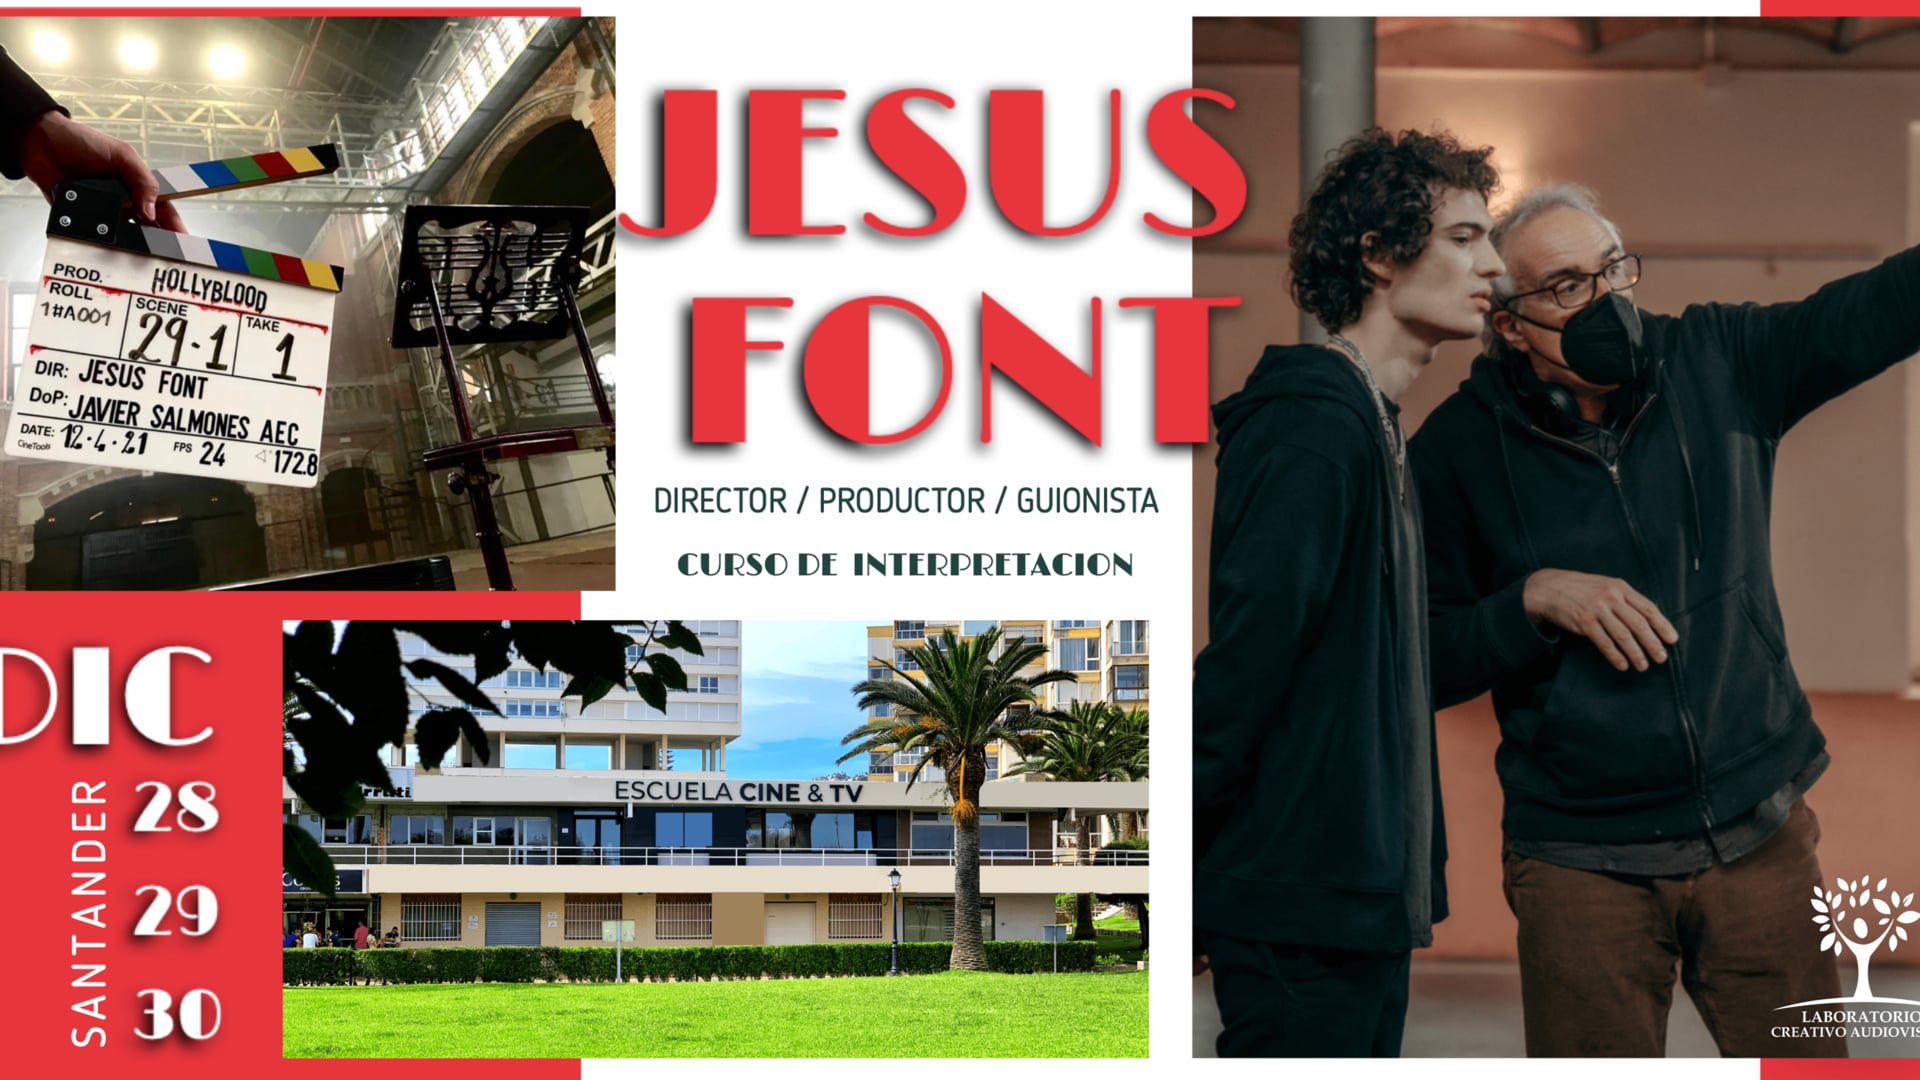 JESUS FONT (Director, productor, guionista)